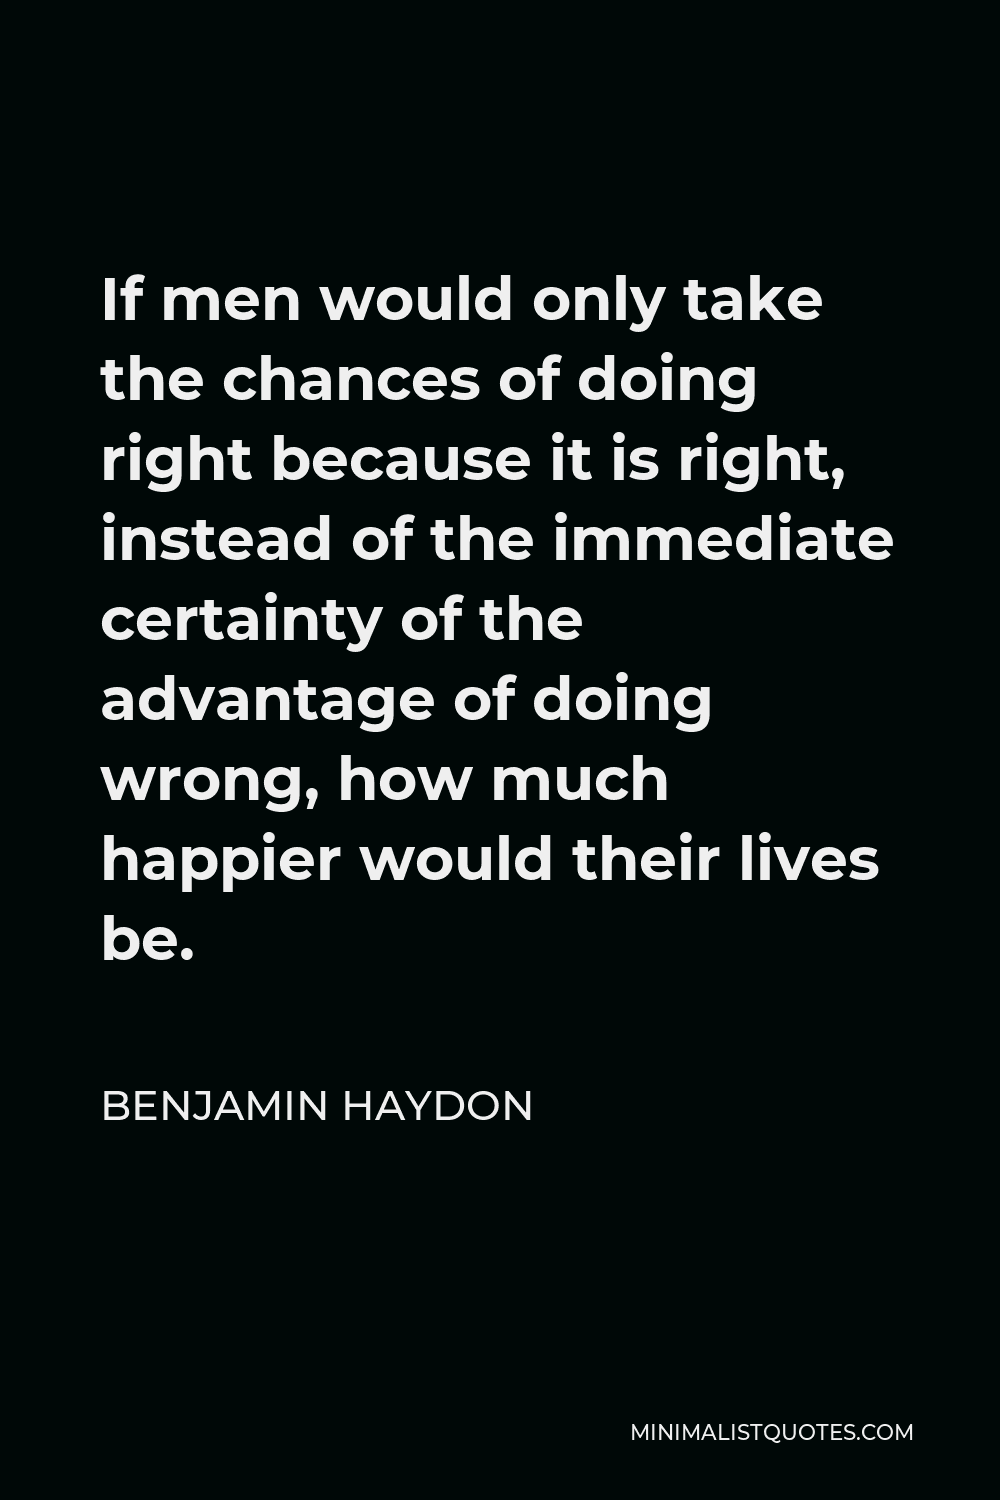 Benjamin Haydon Quote - If men would only take the chances of doing right because it is right, instead of the immediate certainty of the advantage of doing wrong, how much happier would their lives be.